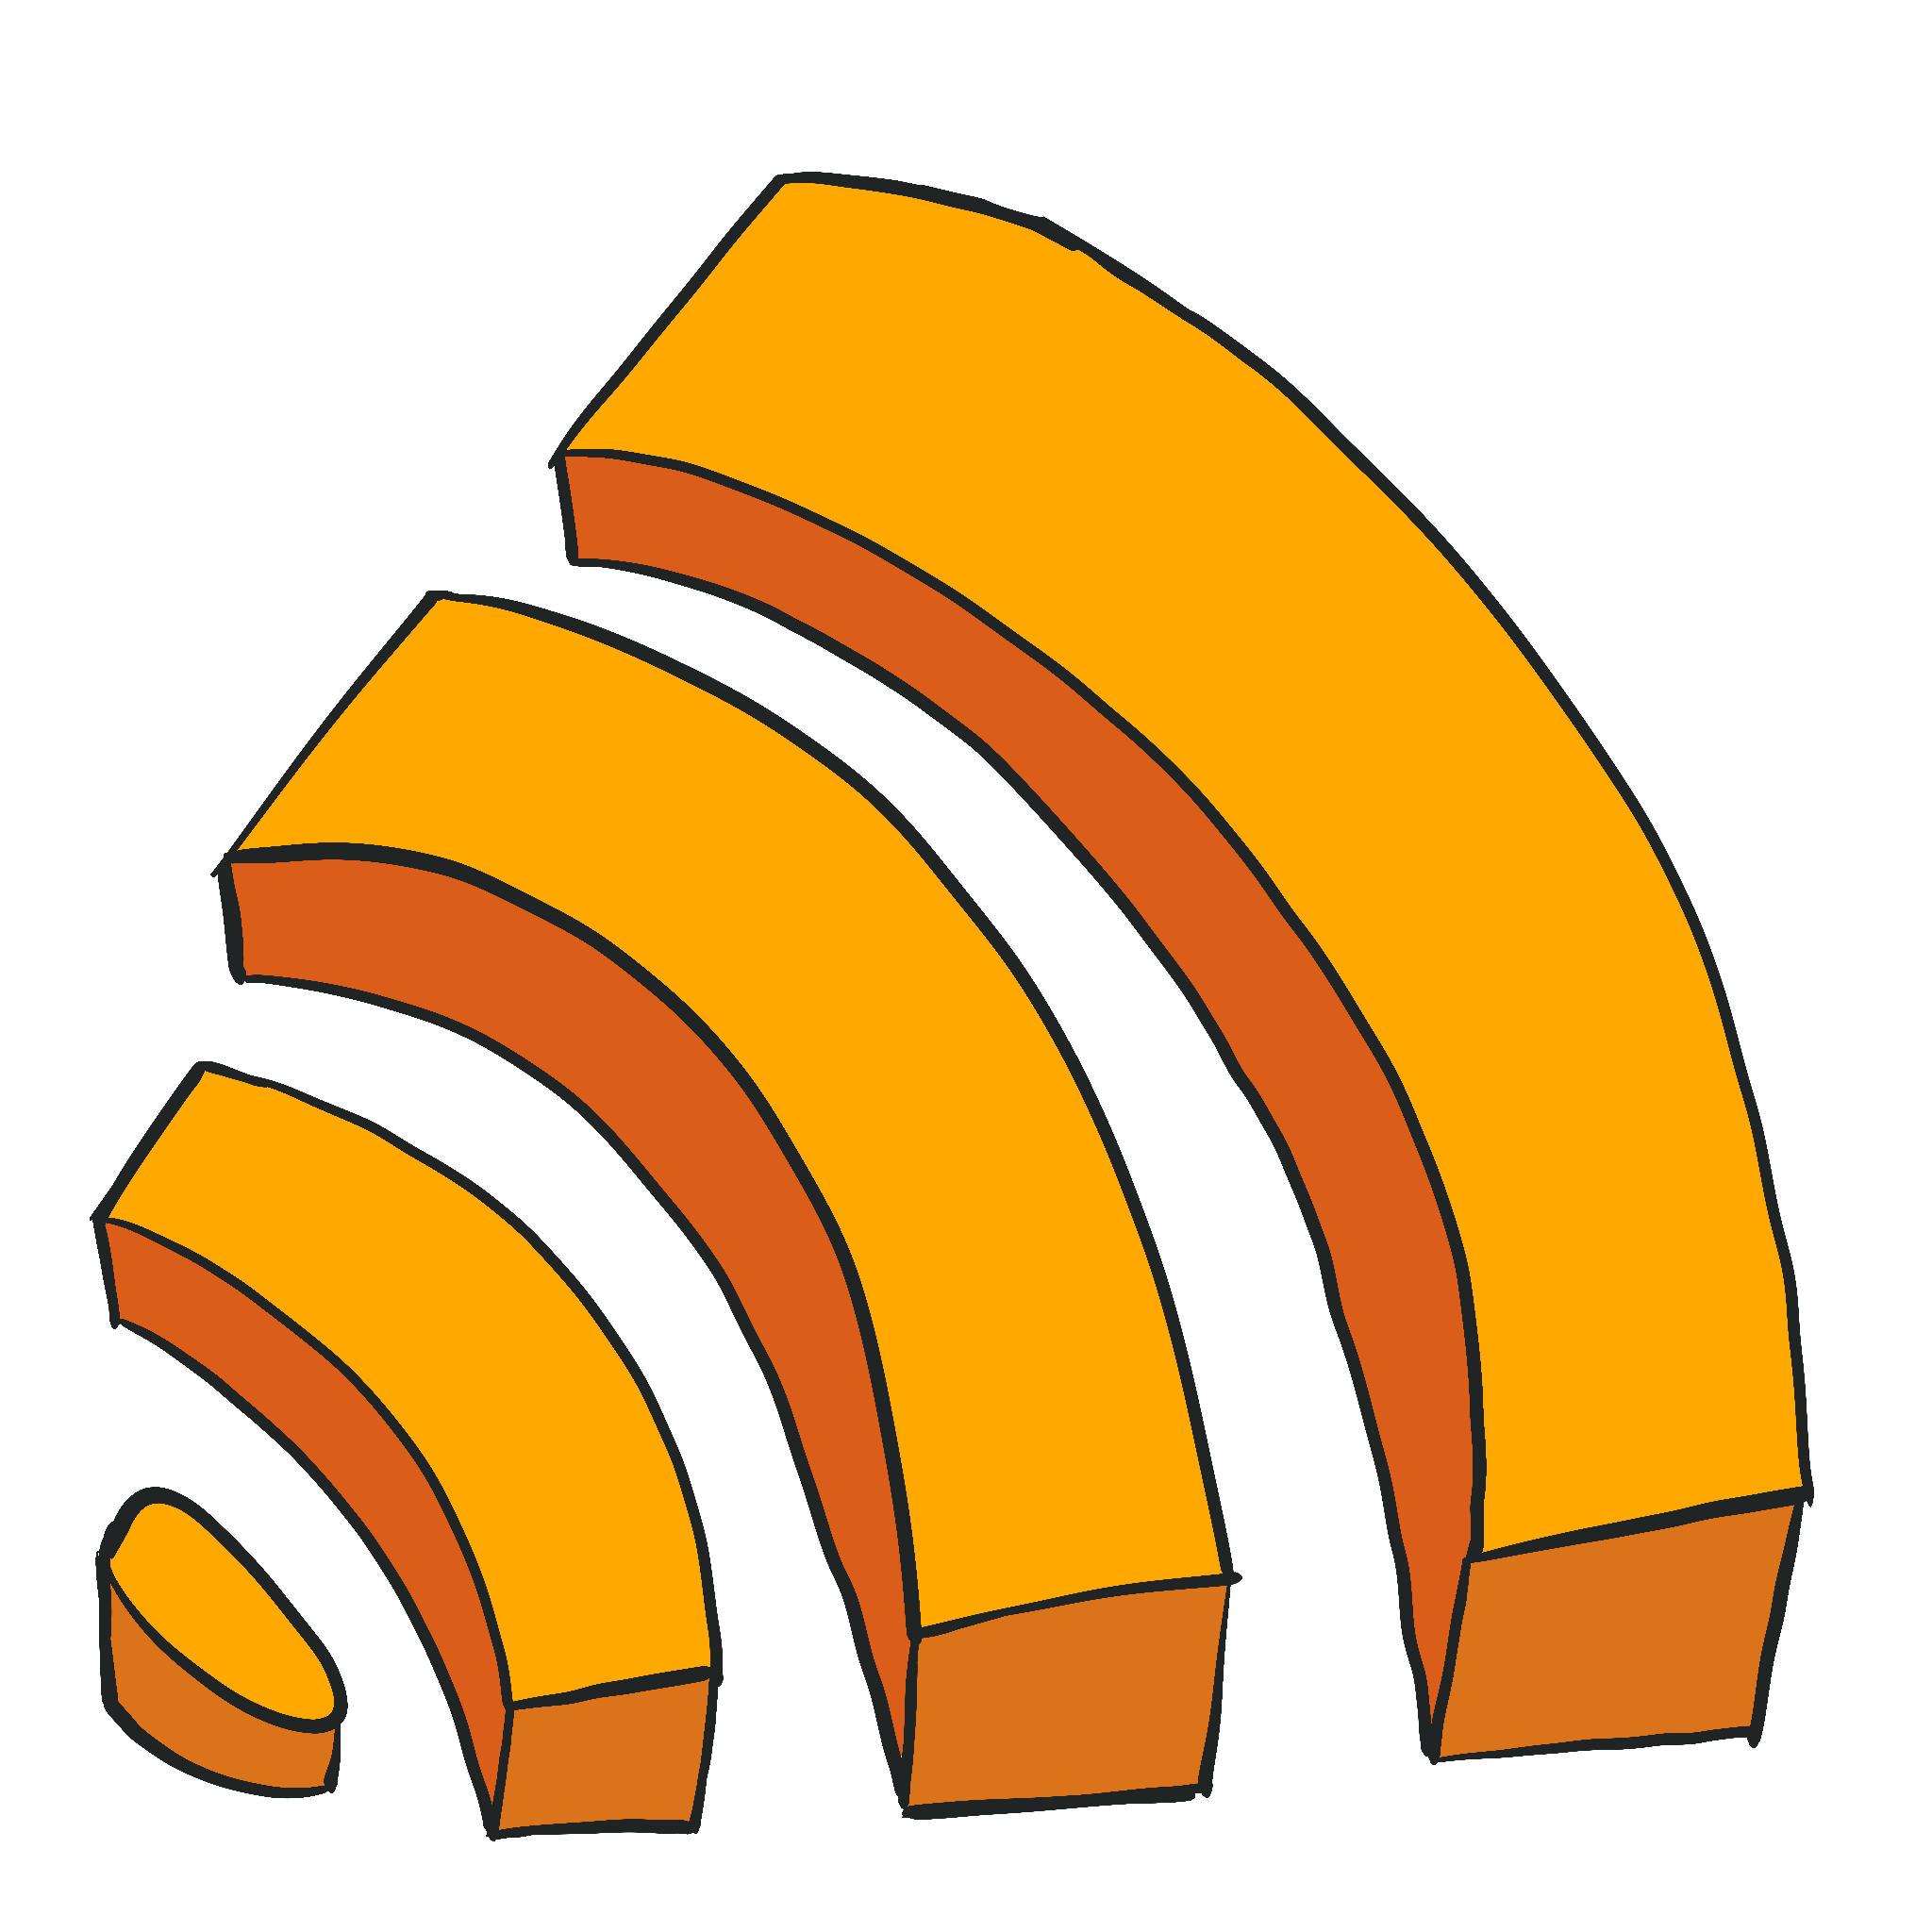 Hand-drawn icon of the RSS logo